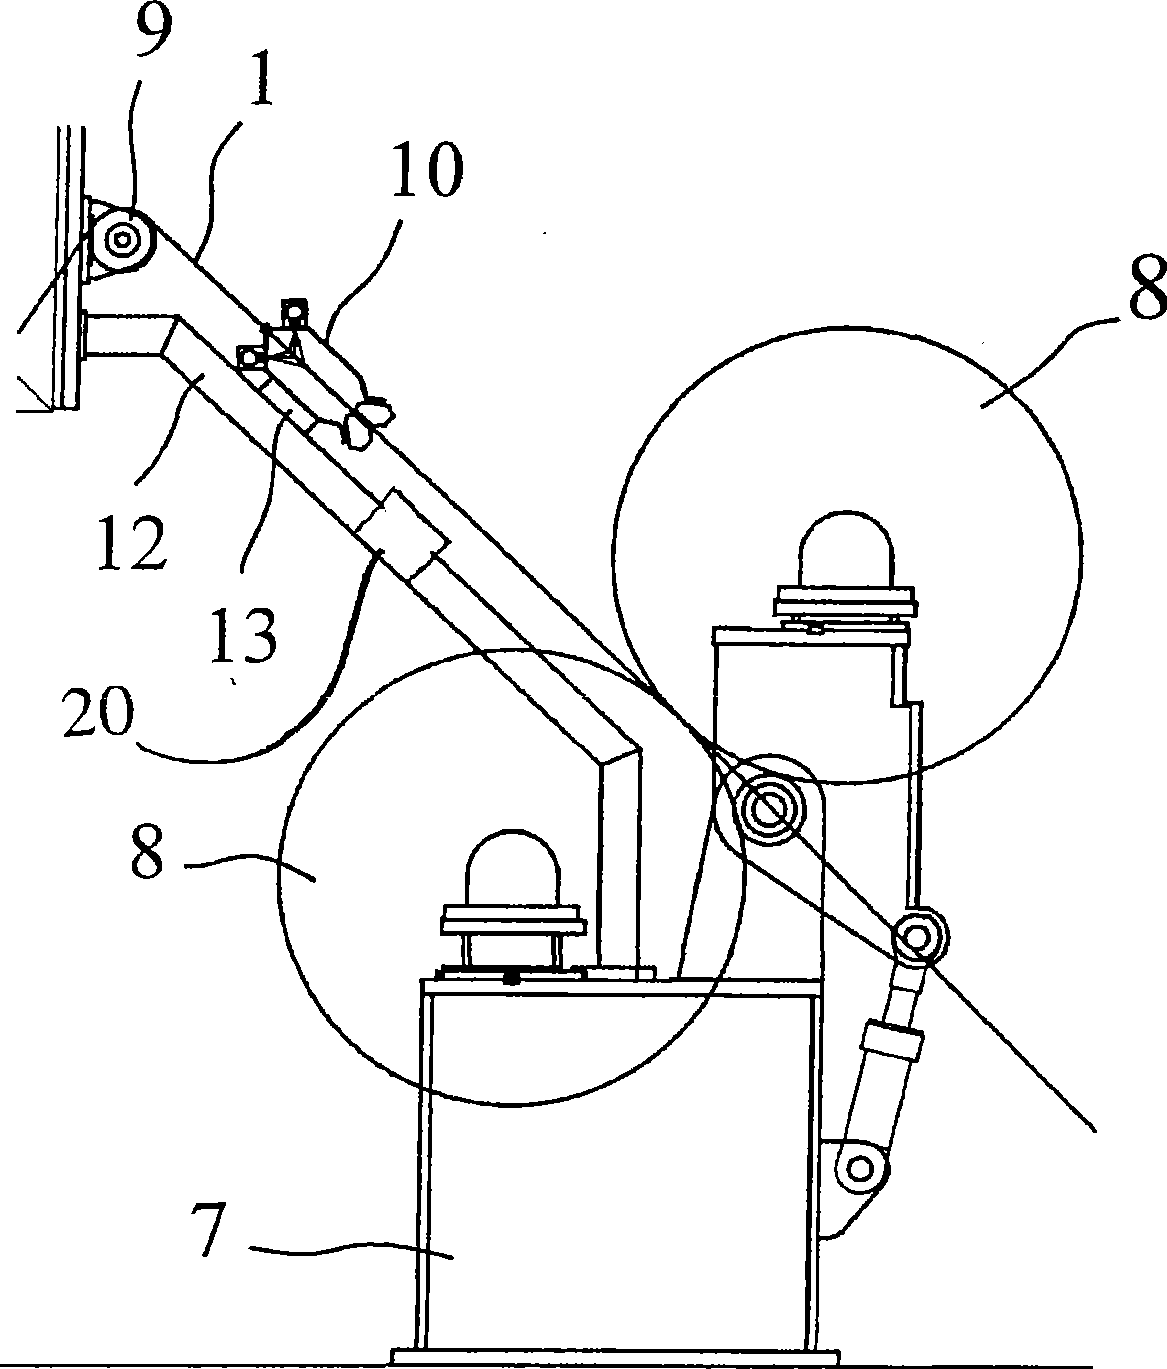 Method and apparatus for treating a fibre web